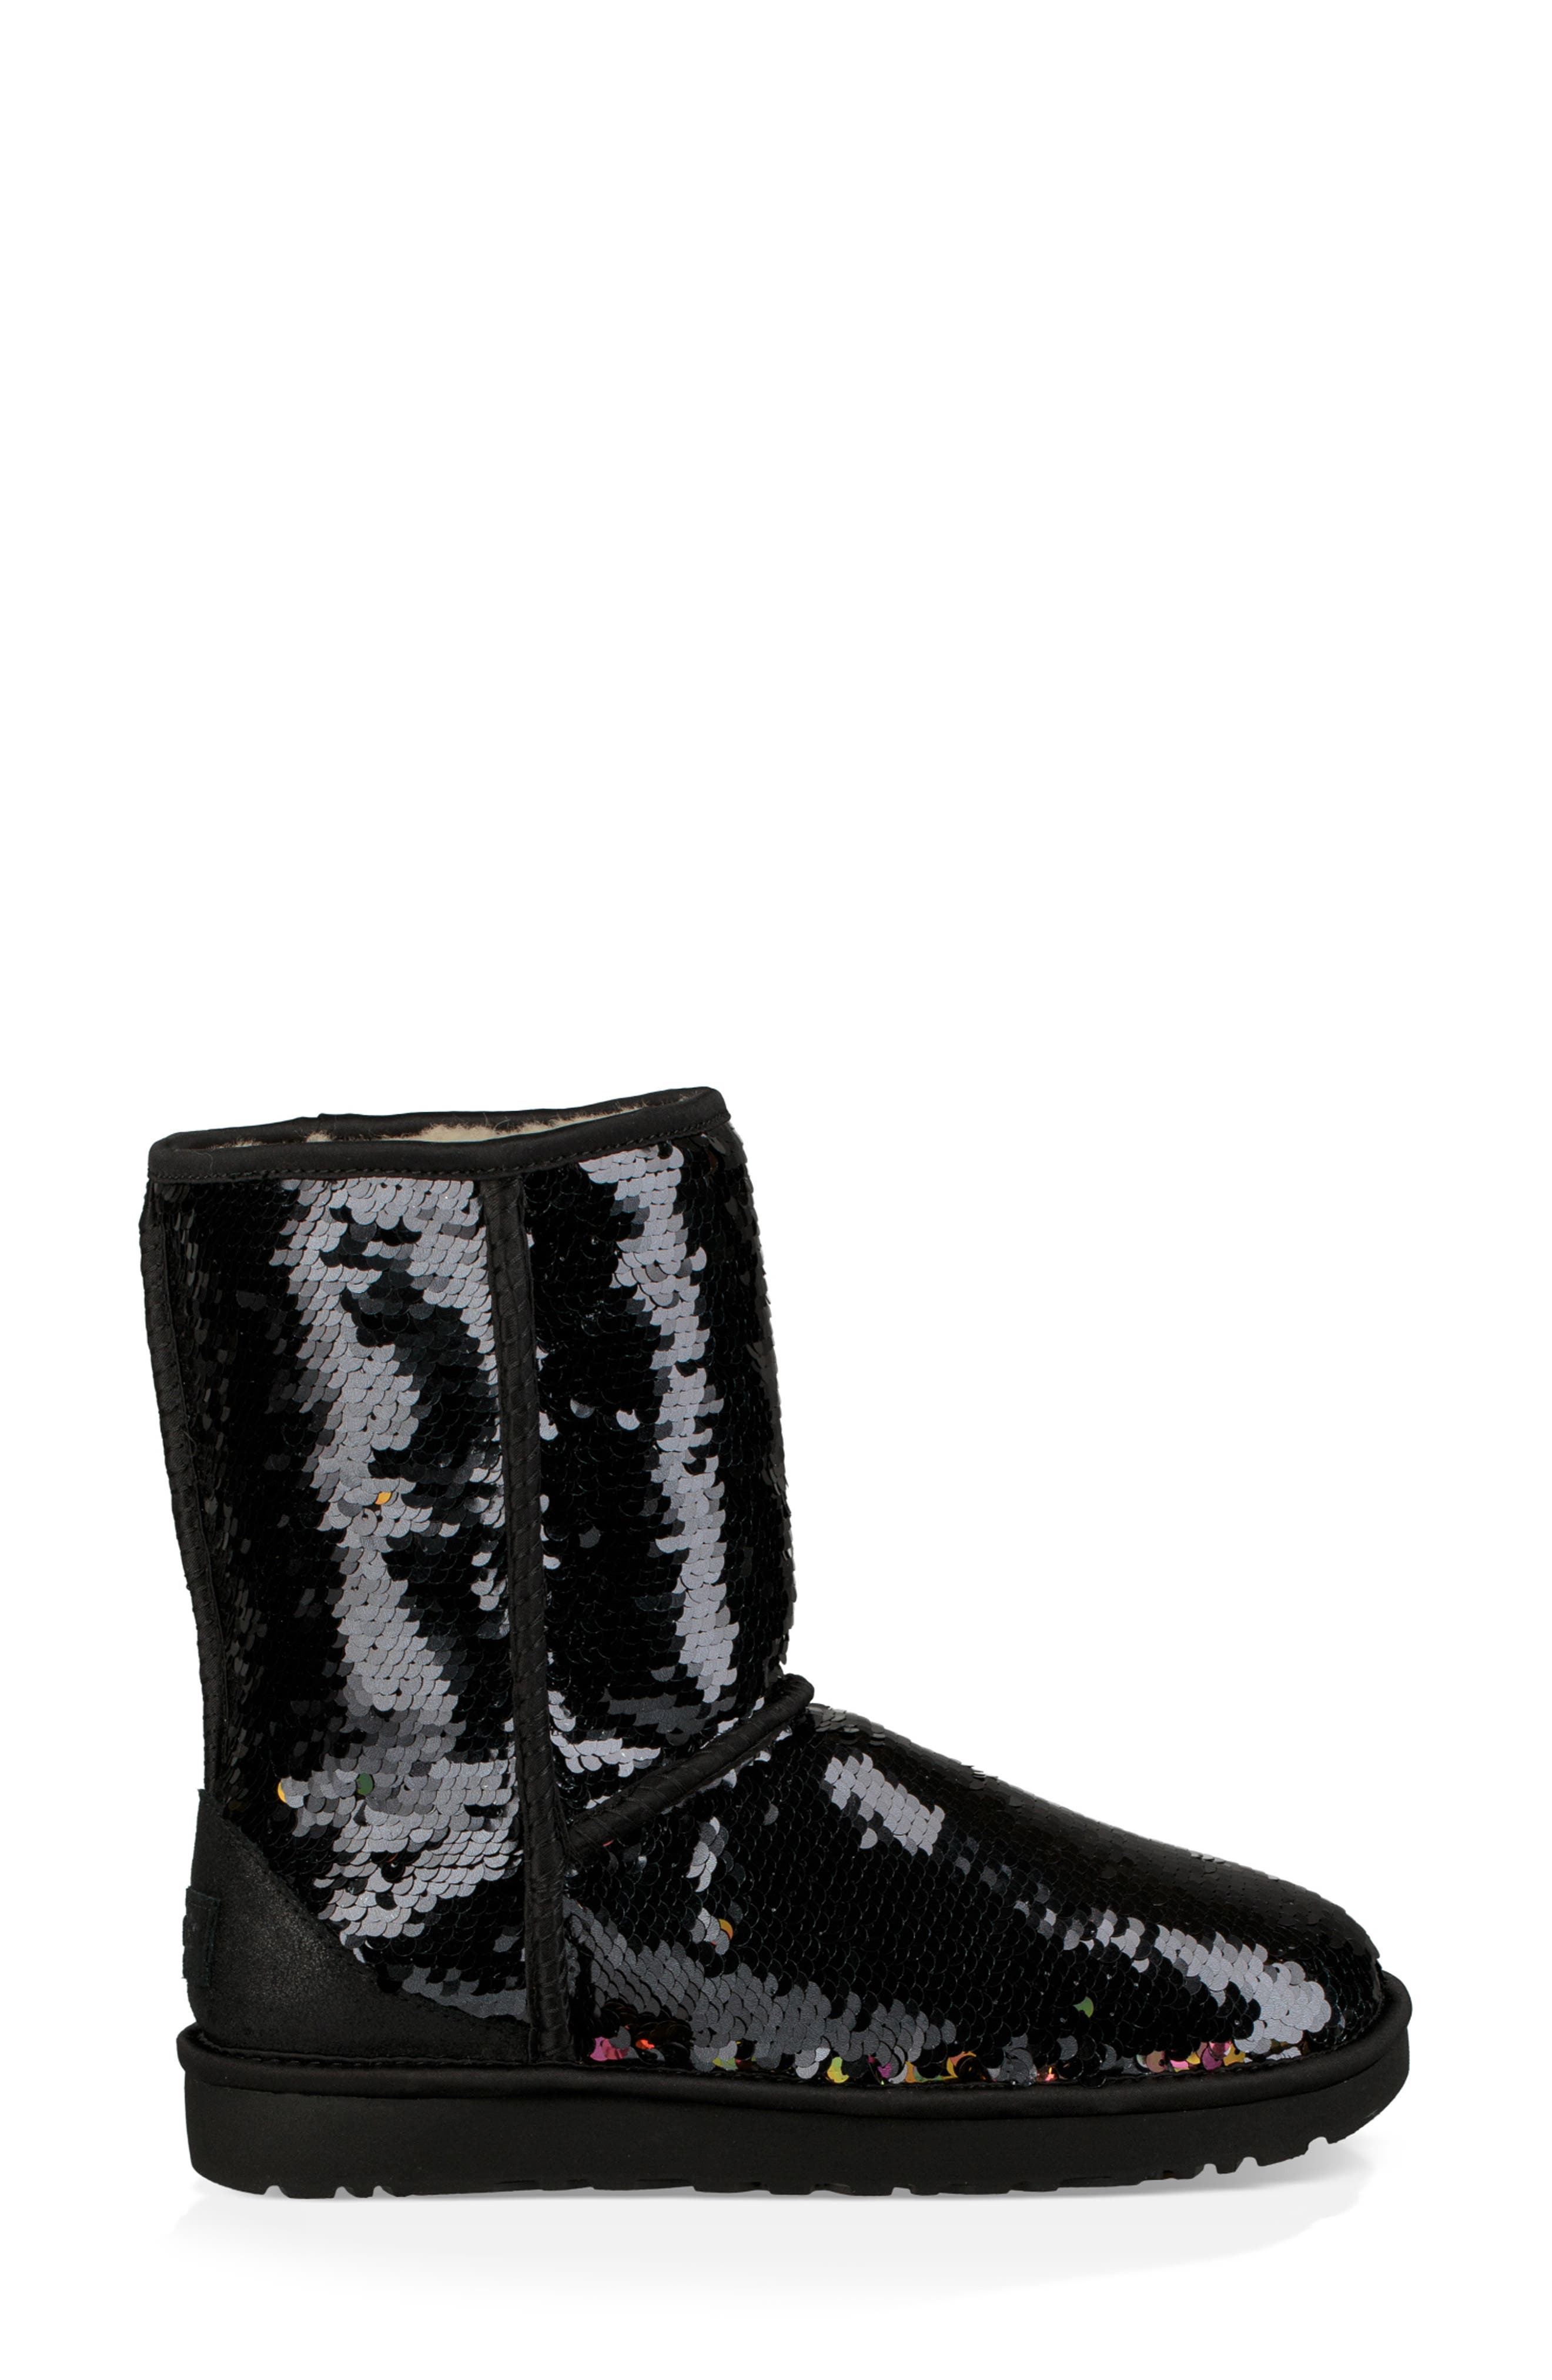 sparkly ugg boots